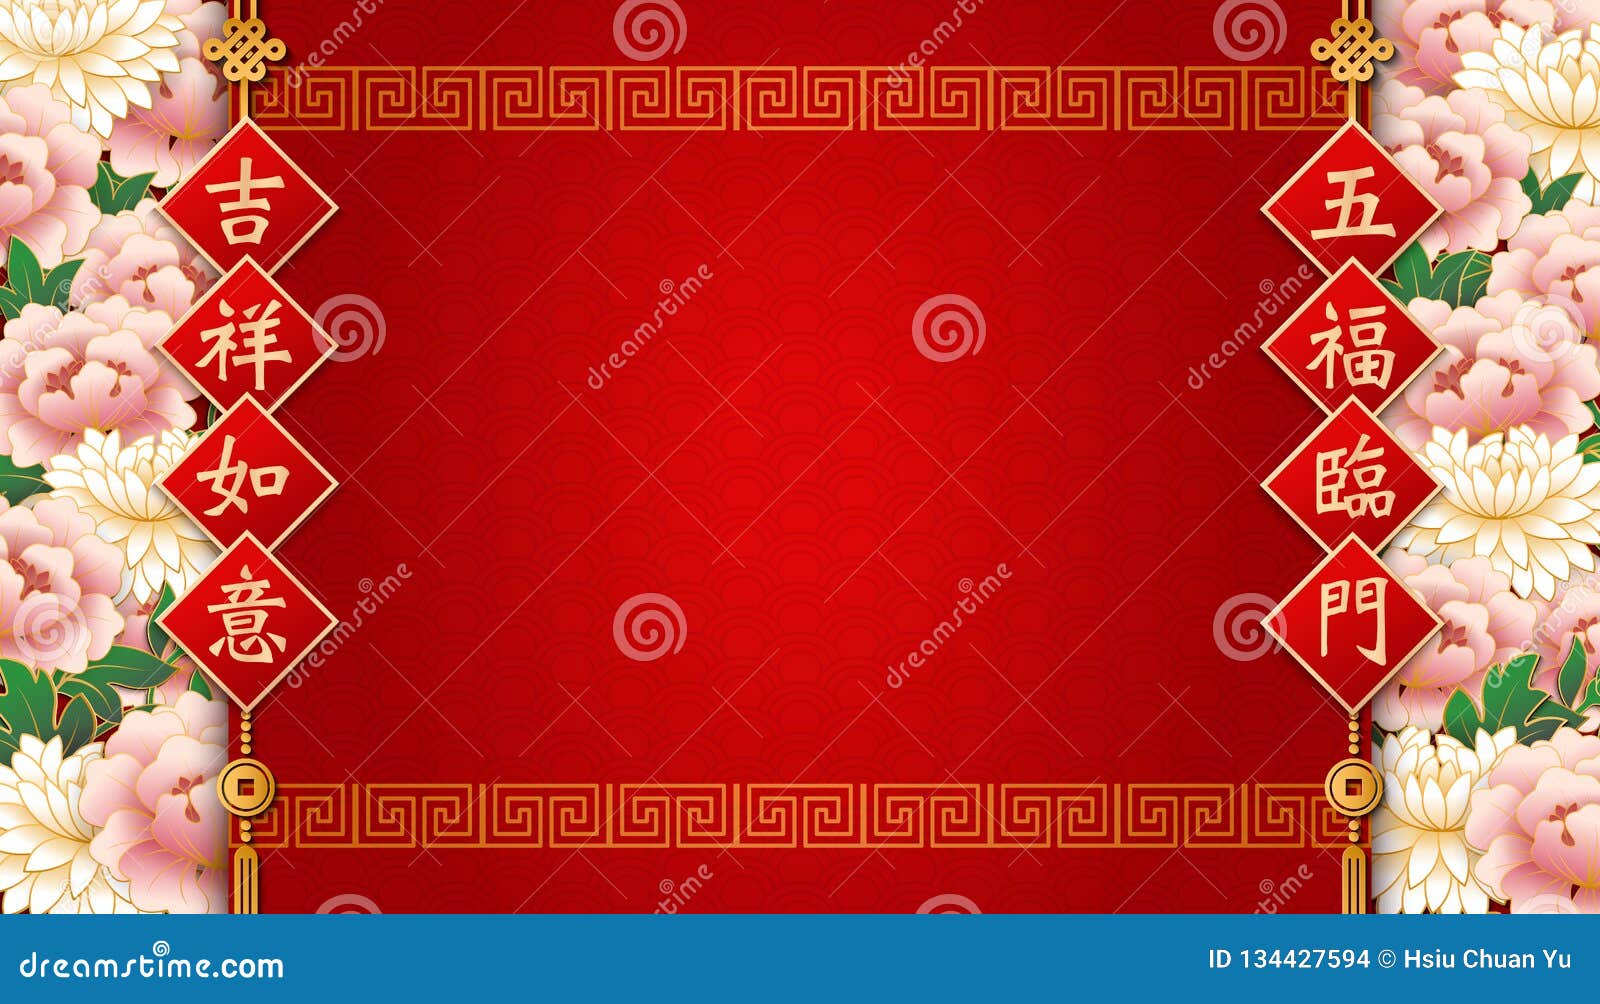 happy chinese new year relief peony flower spring couplet spiral cross lattice frame border